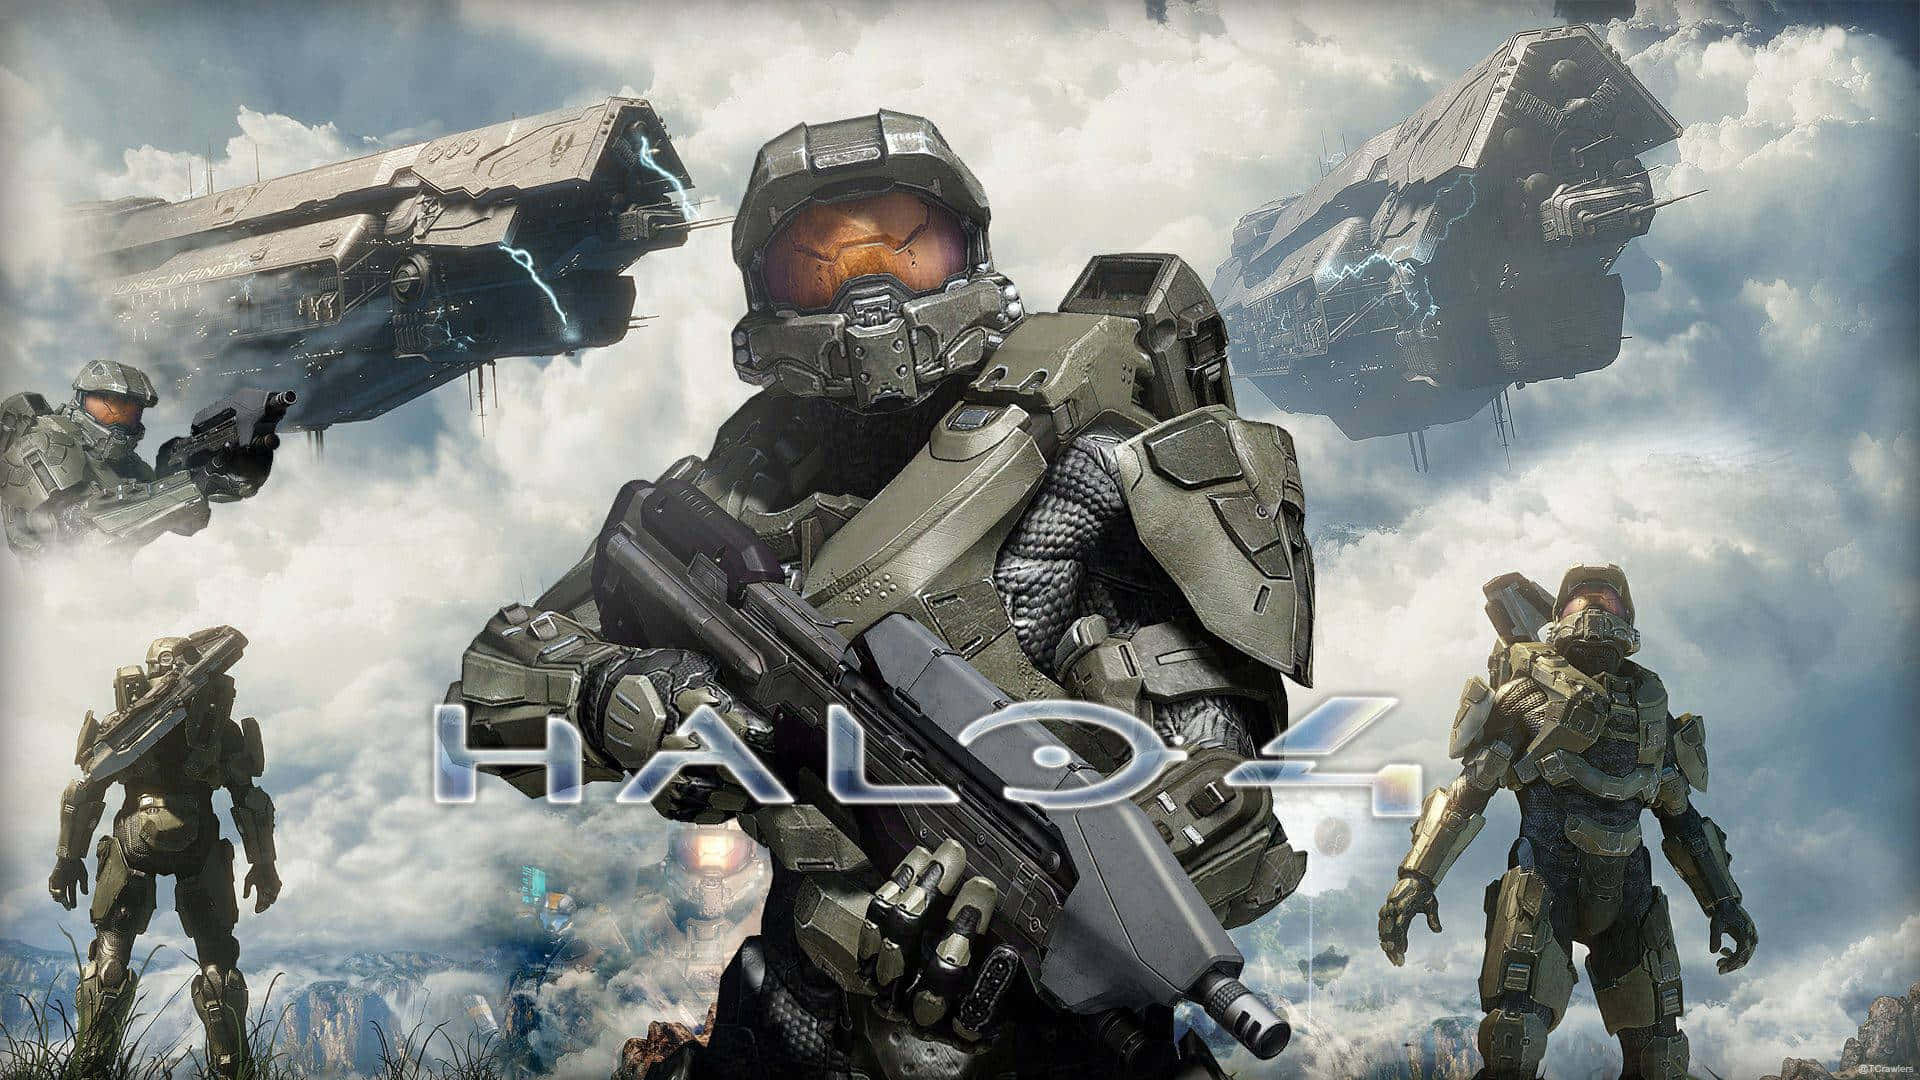 Cool Halo 4 Soldiers Wallpaper